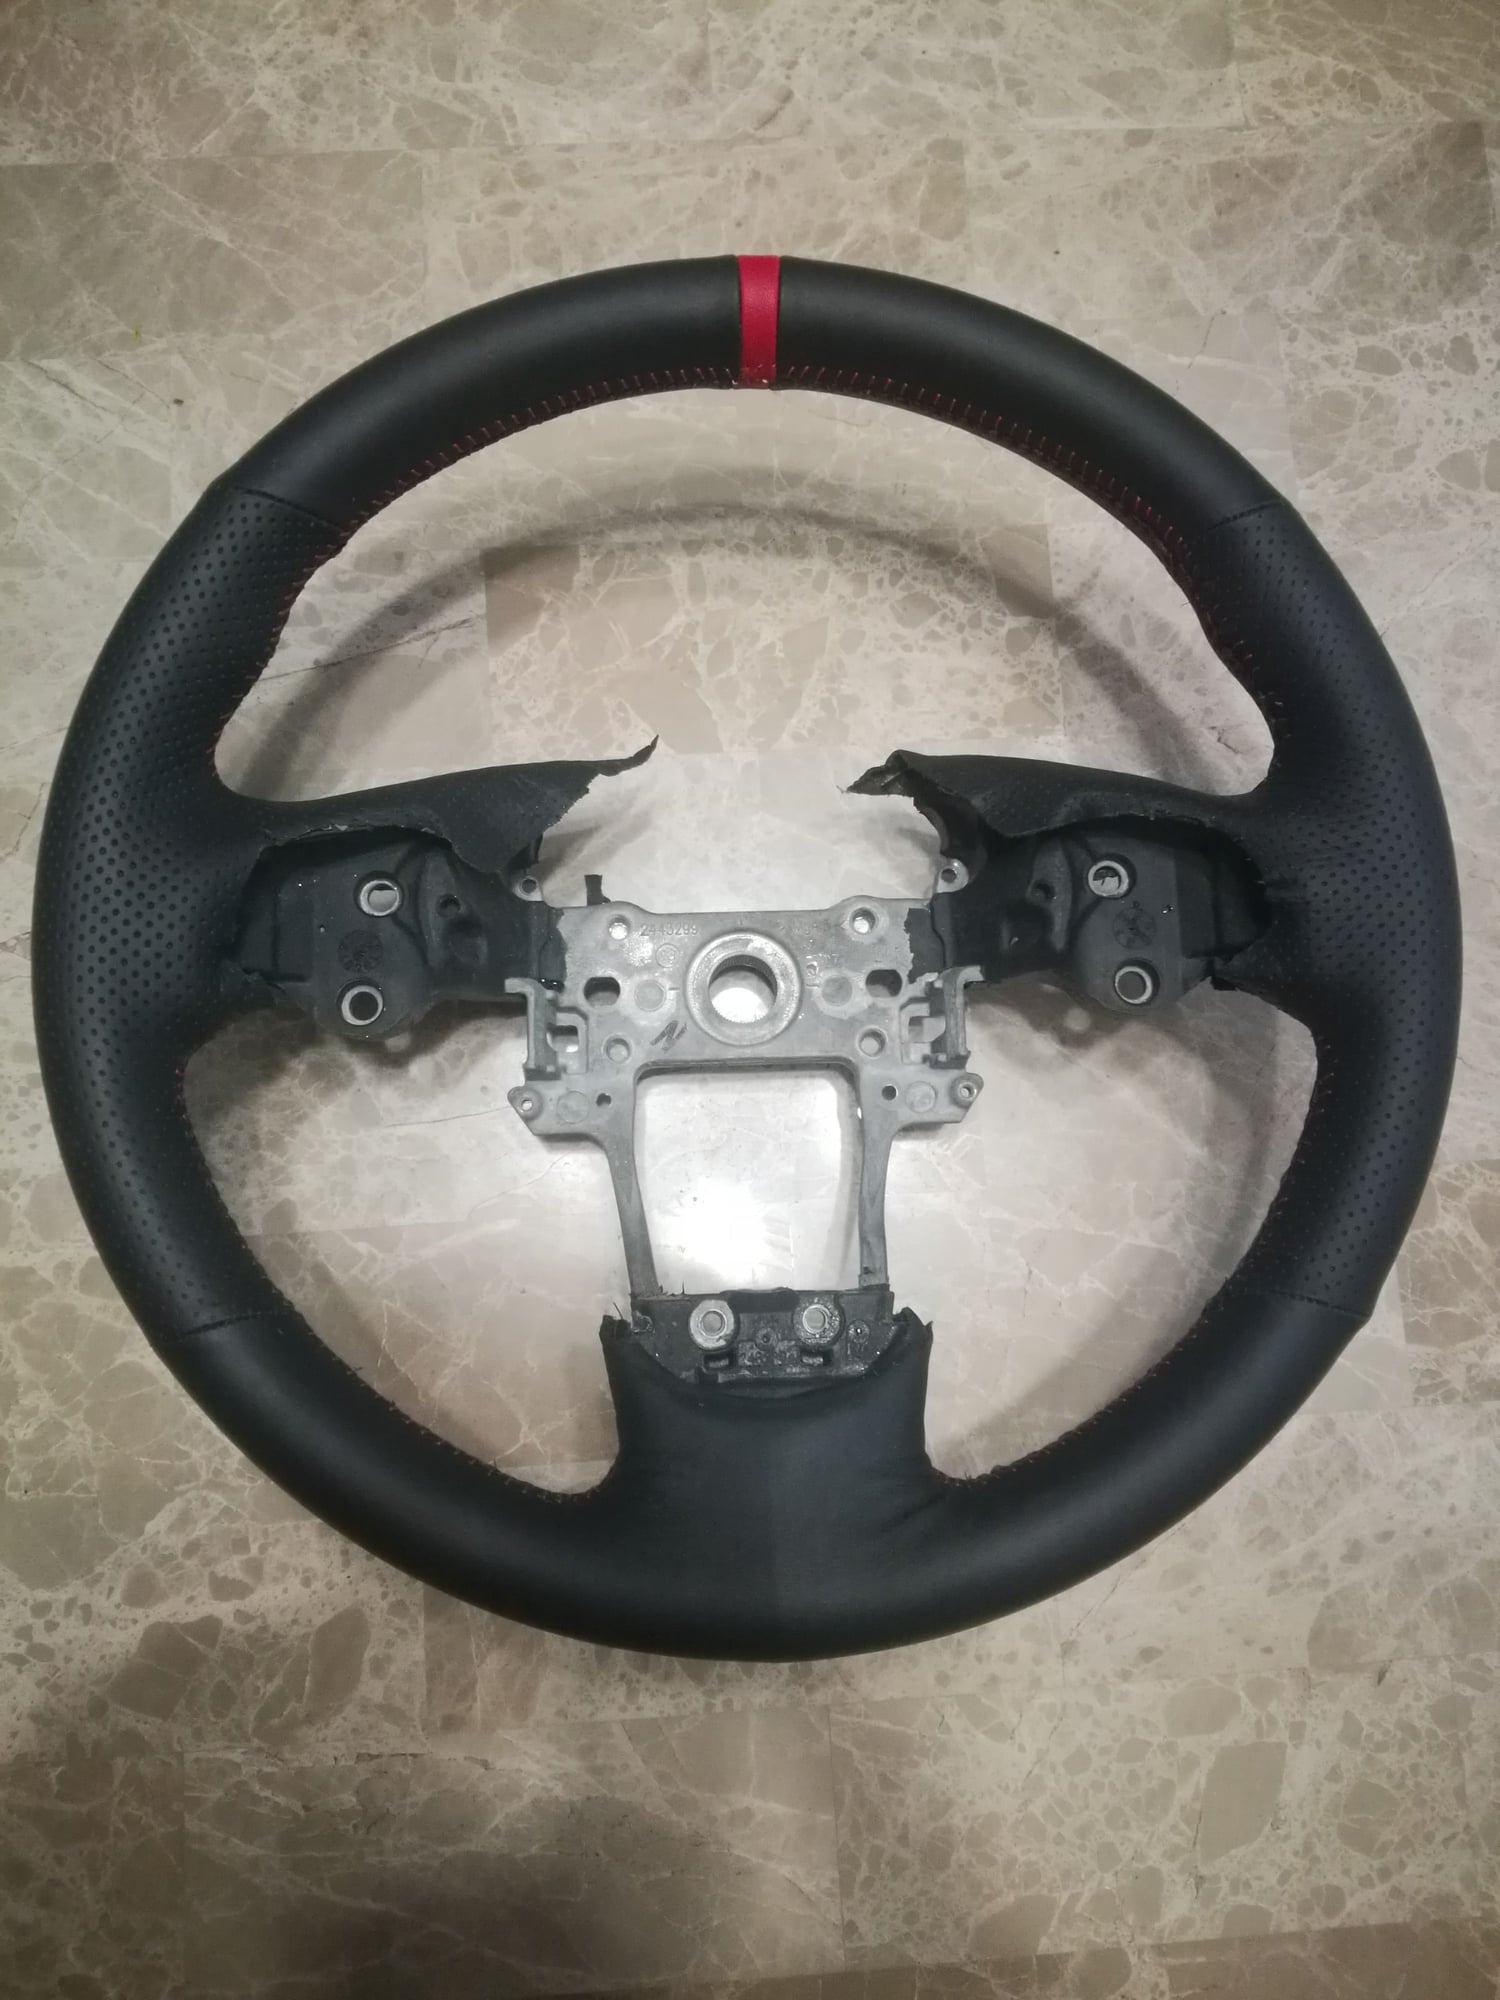 Interior/Upholstery - FS: Acura ILX Perforated Leather Steering Wheel - New - All Years Acura ILX - Baton Rouge, LA 70817, United States